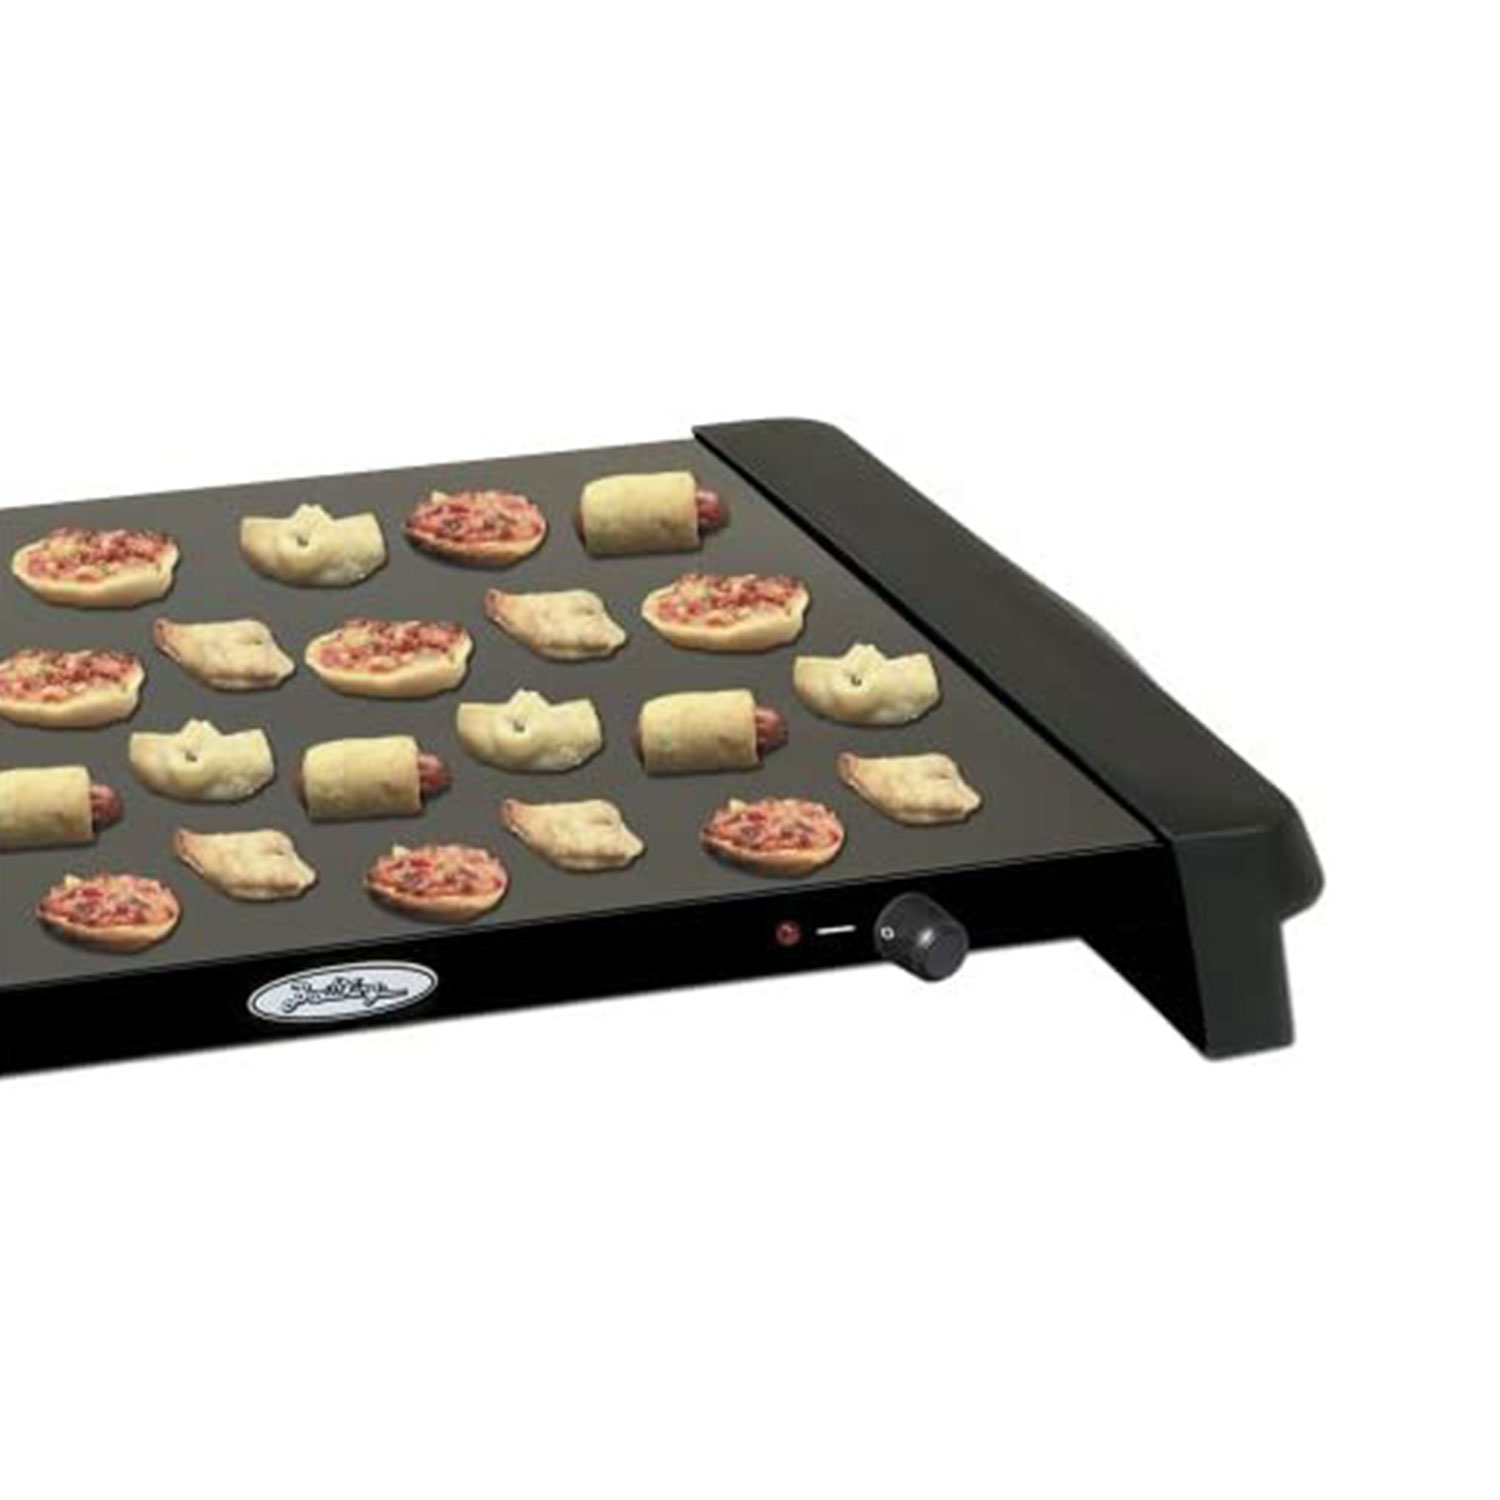 BroilKing Professional 300 Watt Electric Warming Tray, Stainless Steel - image 2 of 3